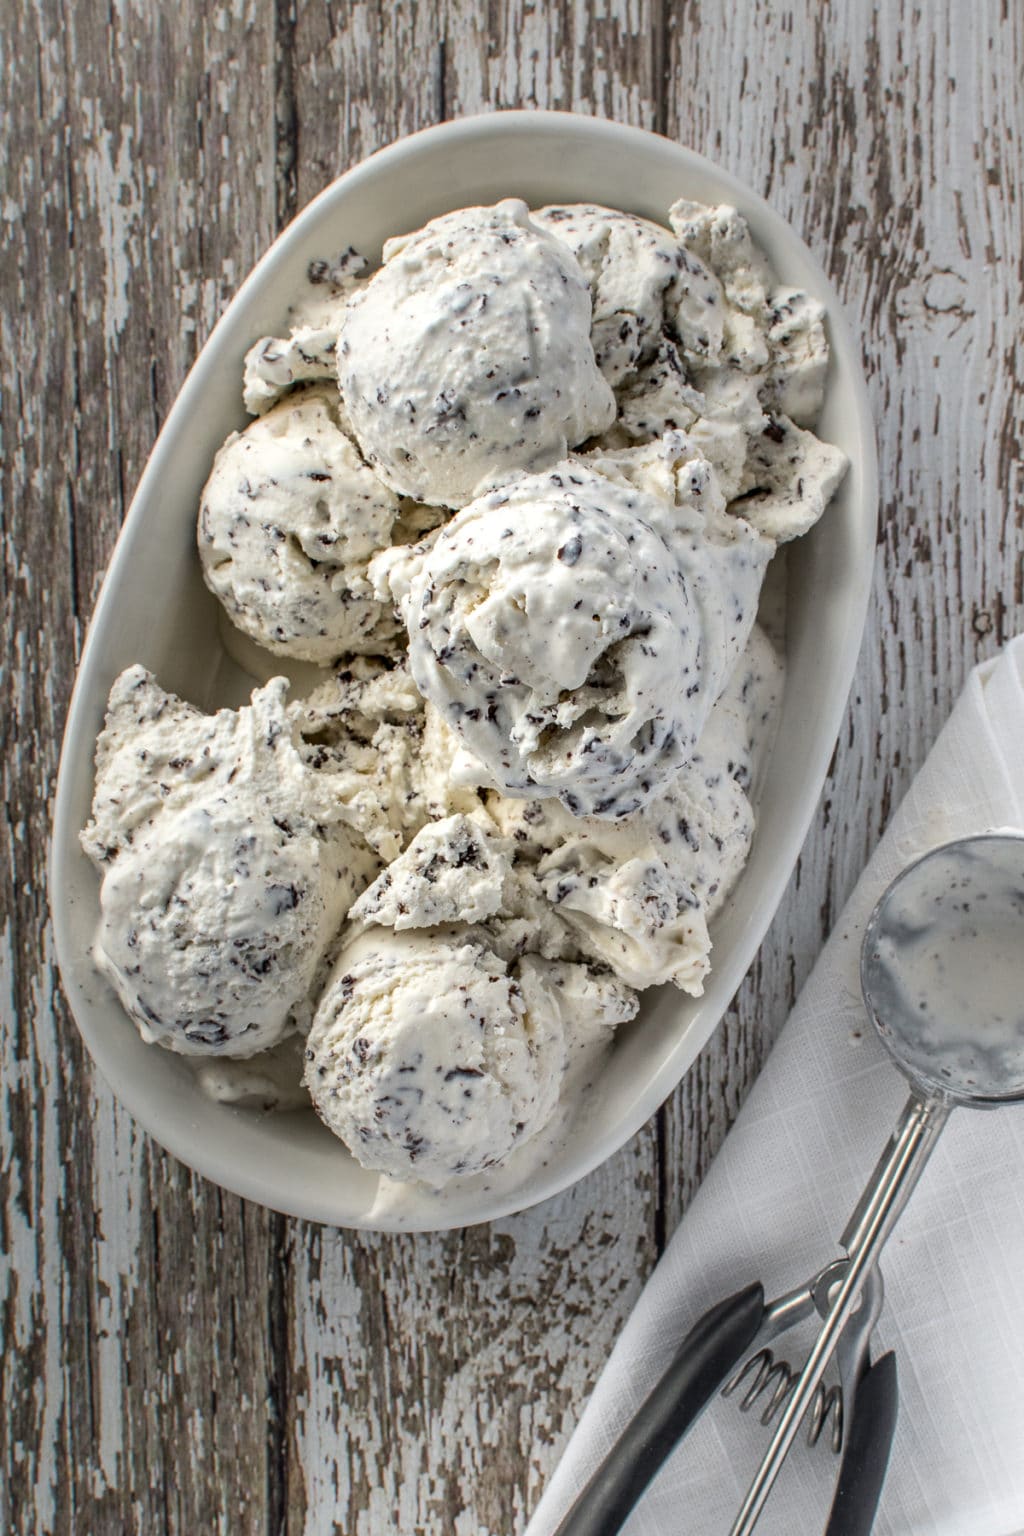 Oval, white bowl filled with vanilla, cream filled with grated chocolate. On a rustic barn board, drop back with a folded napkin on the side to place an empty scoop of ice cream.